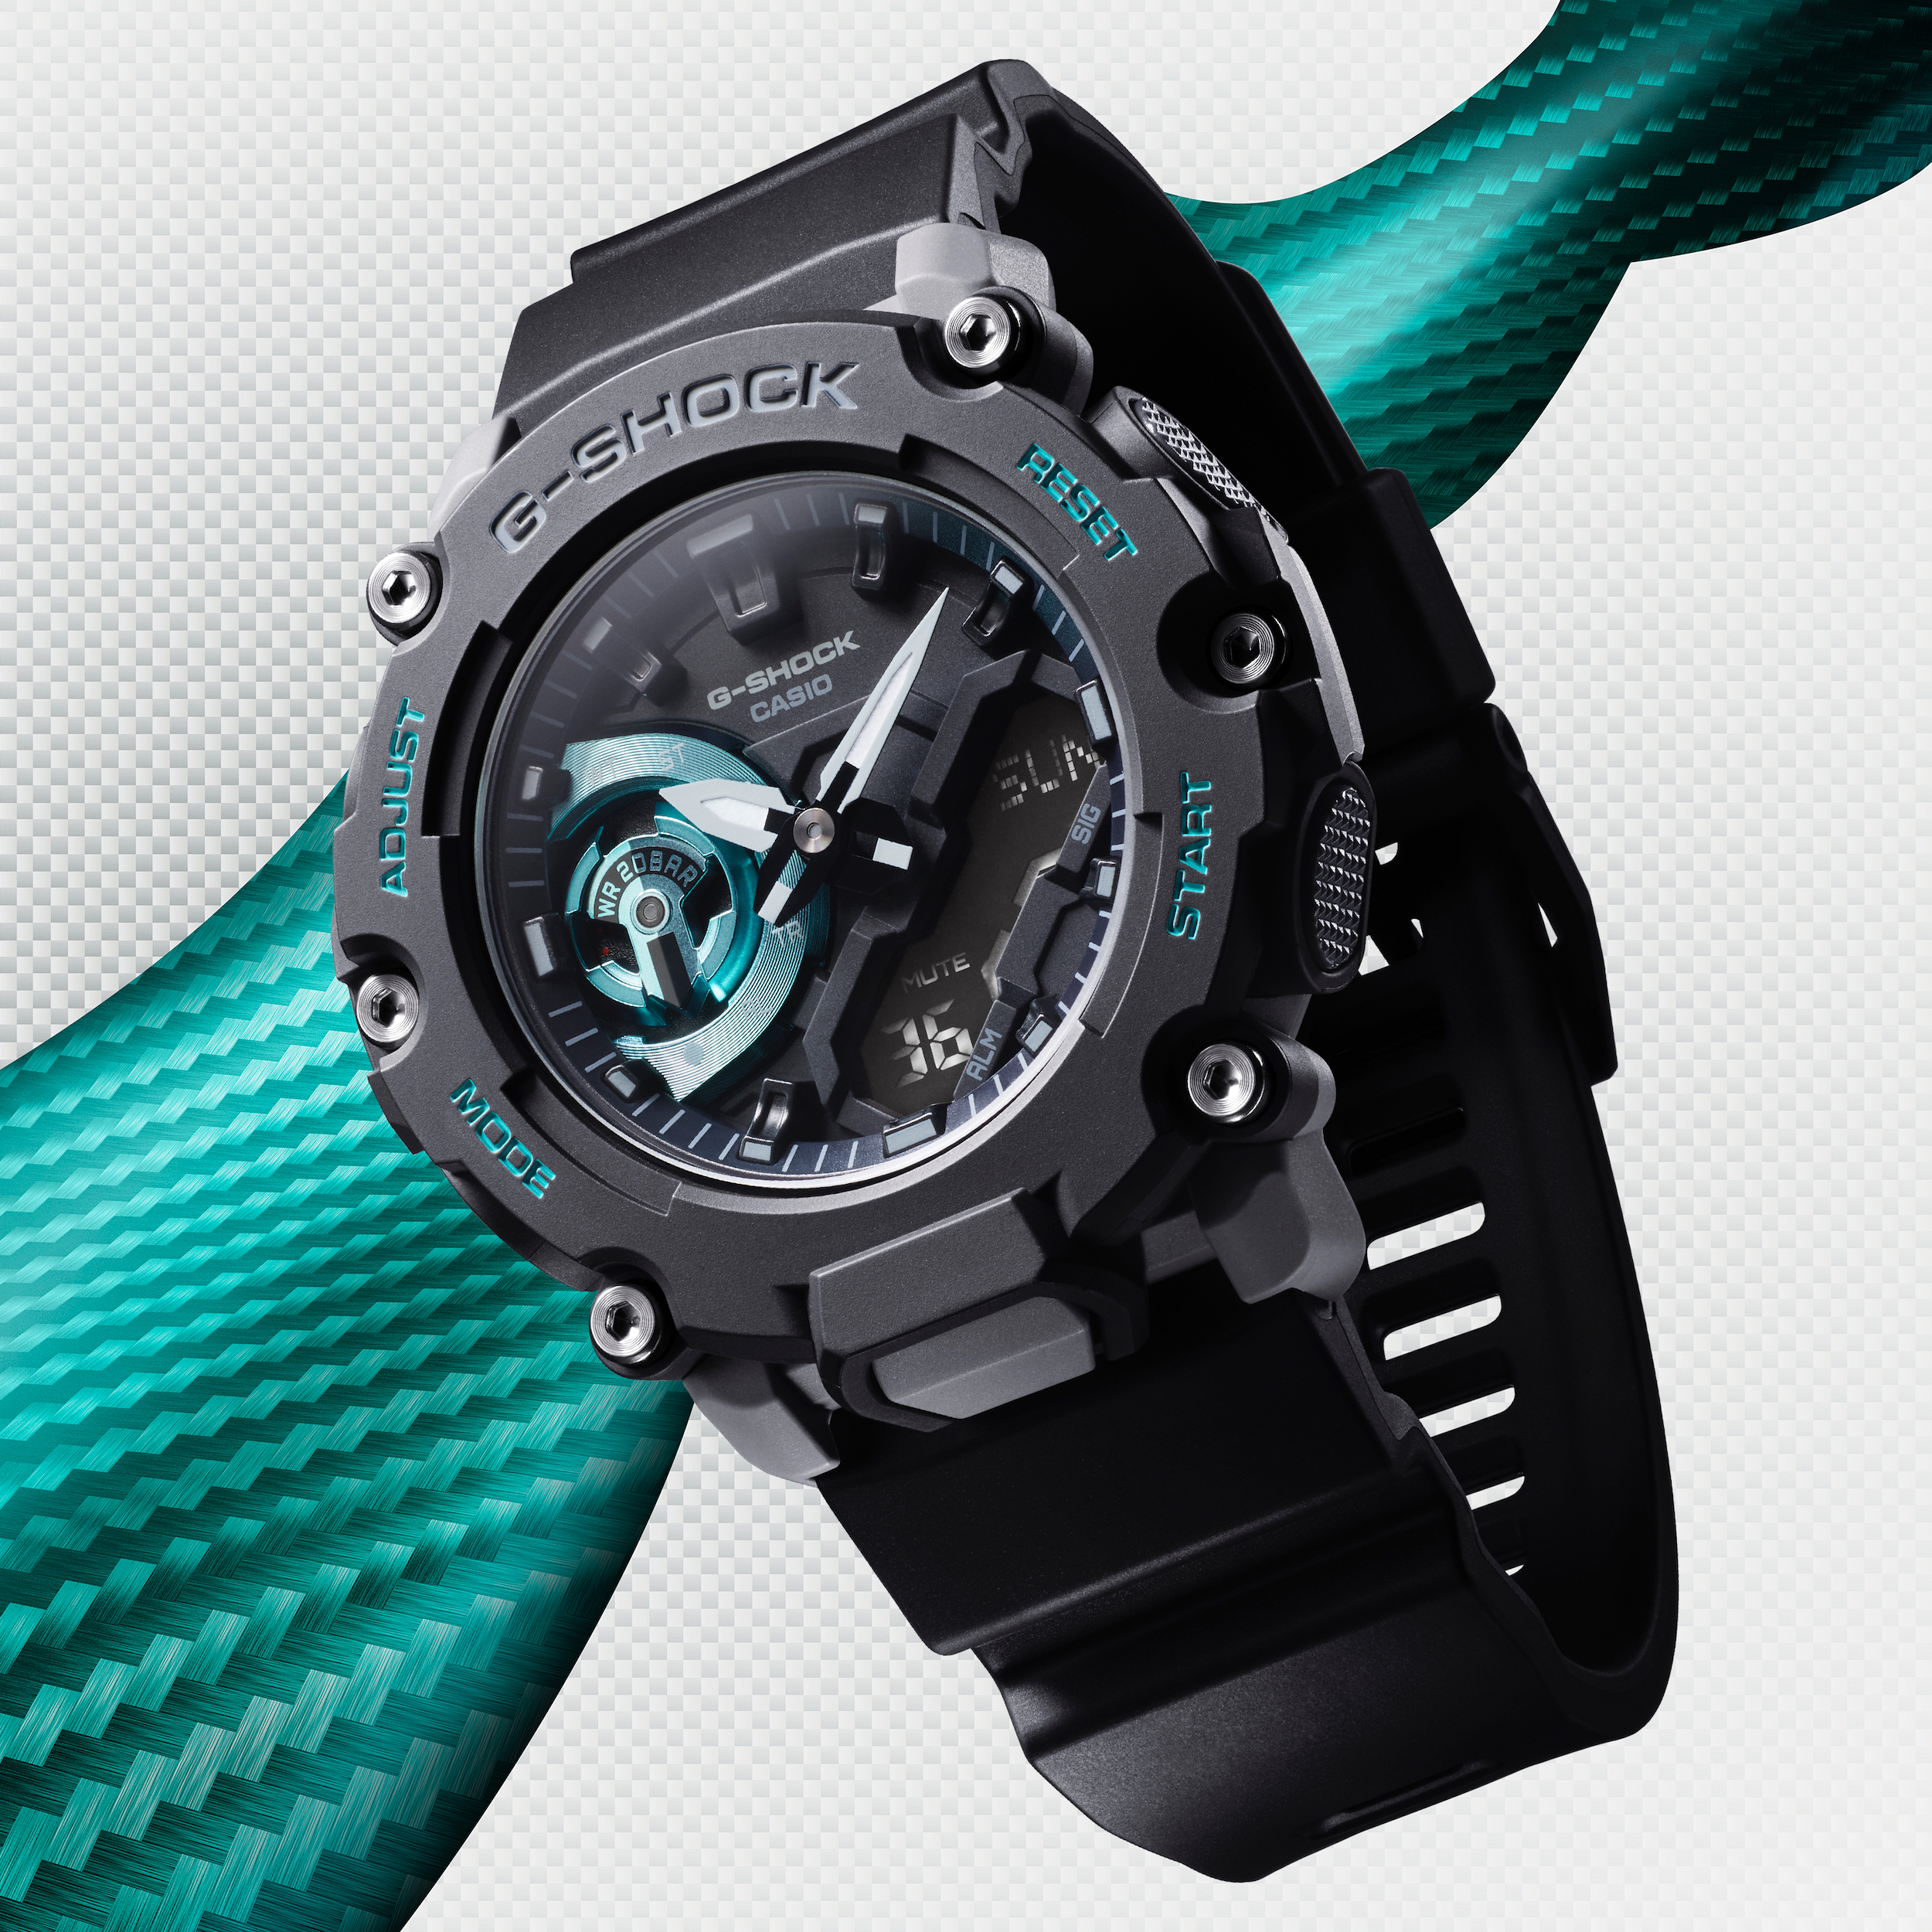 All-New Casio G-Shock Models Released In 2020